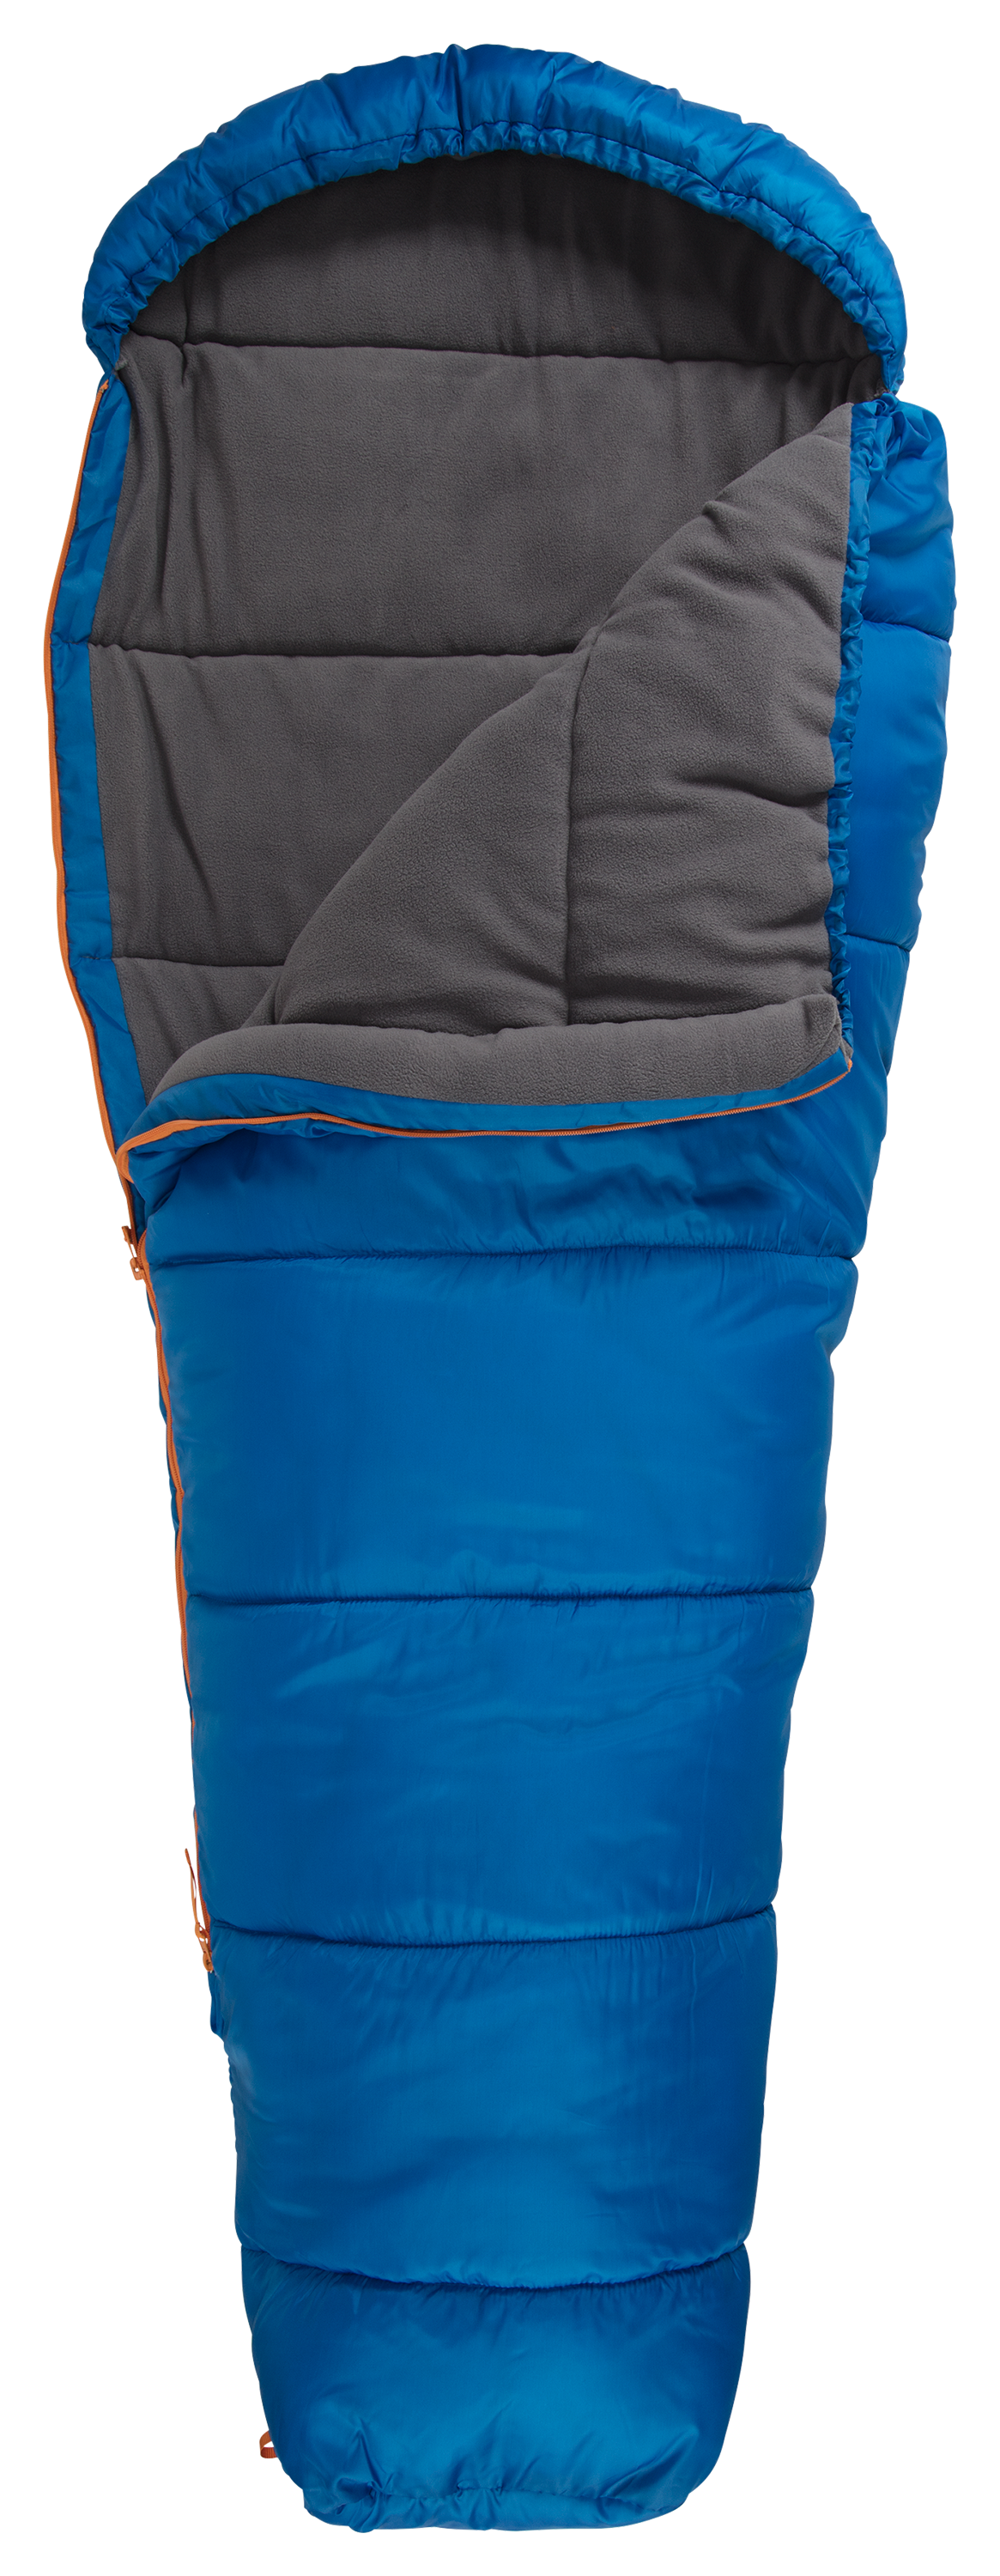 Cabela's Mountain Trapper 0°F Sleeping Bag for Kids